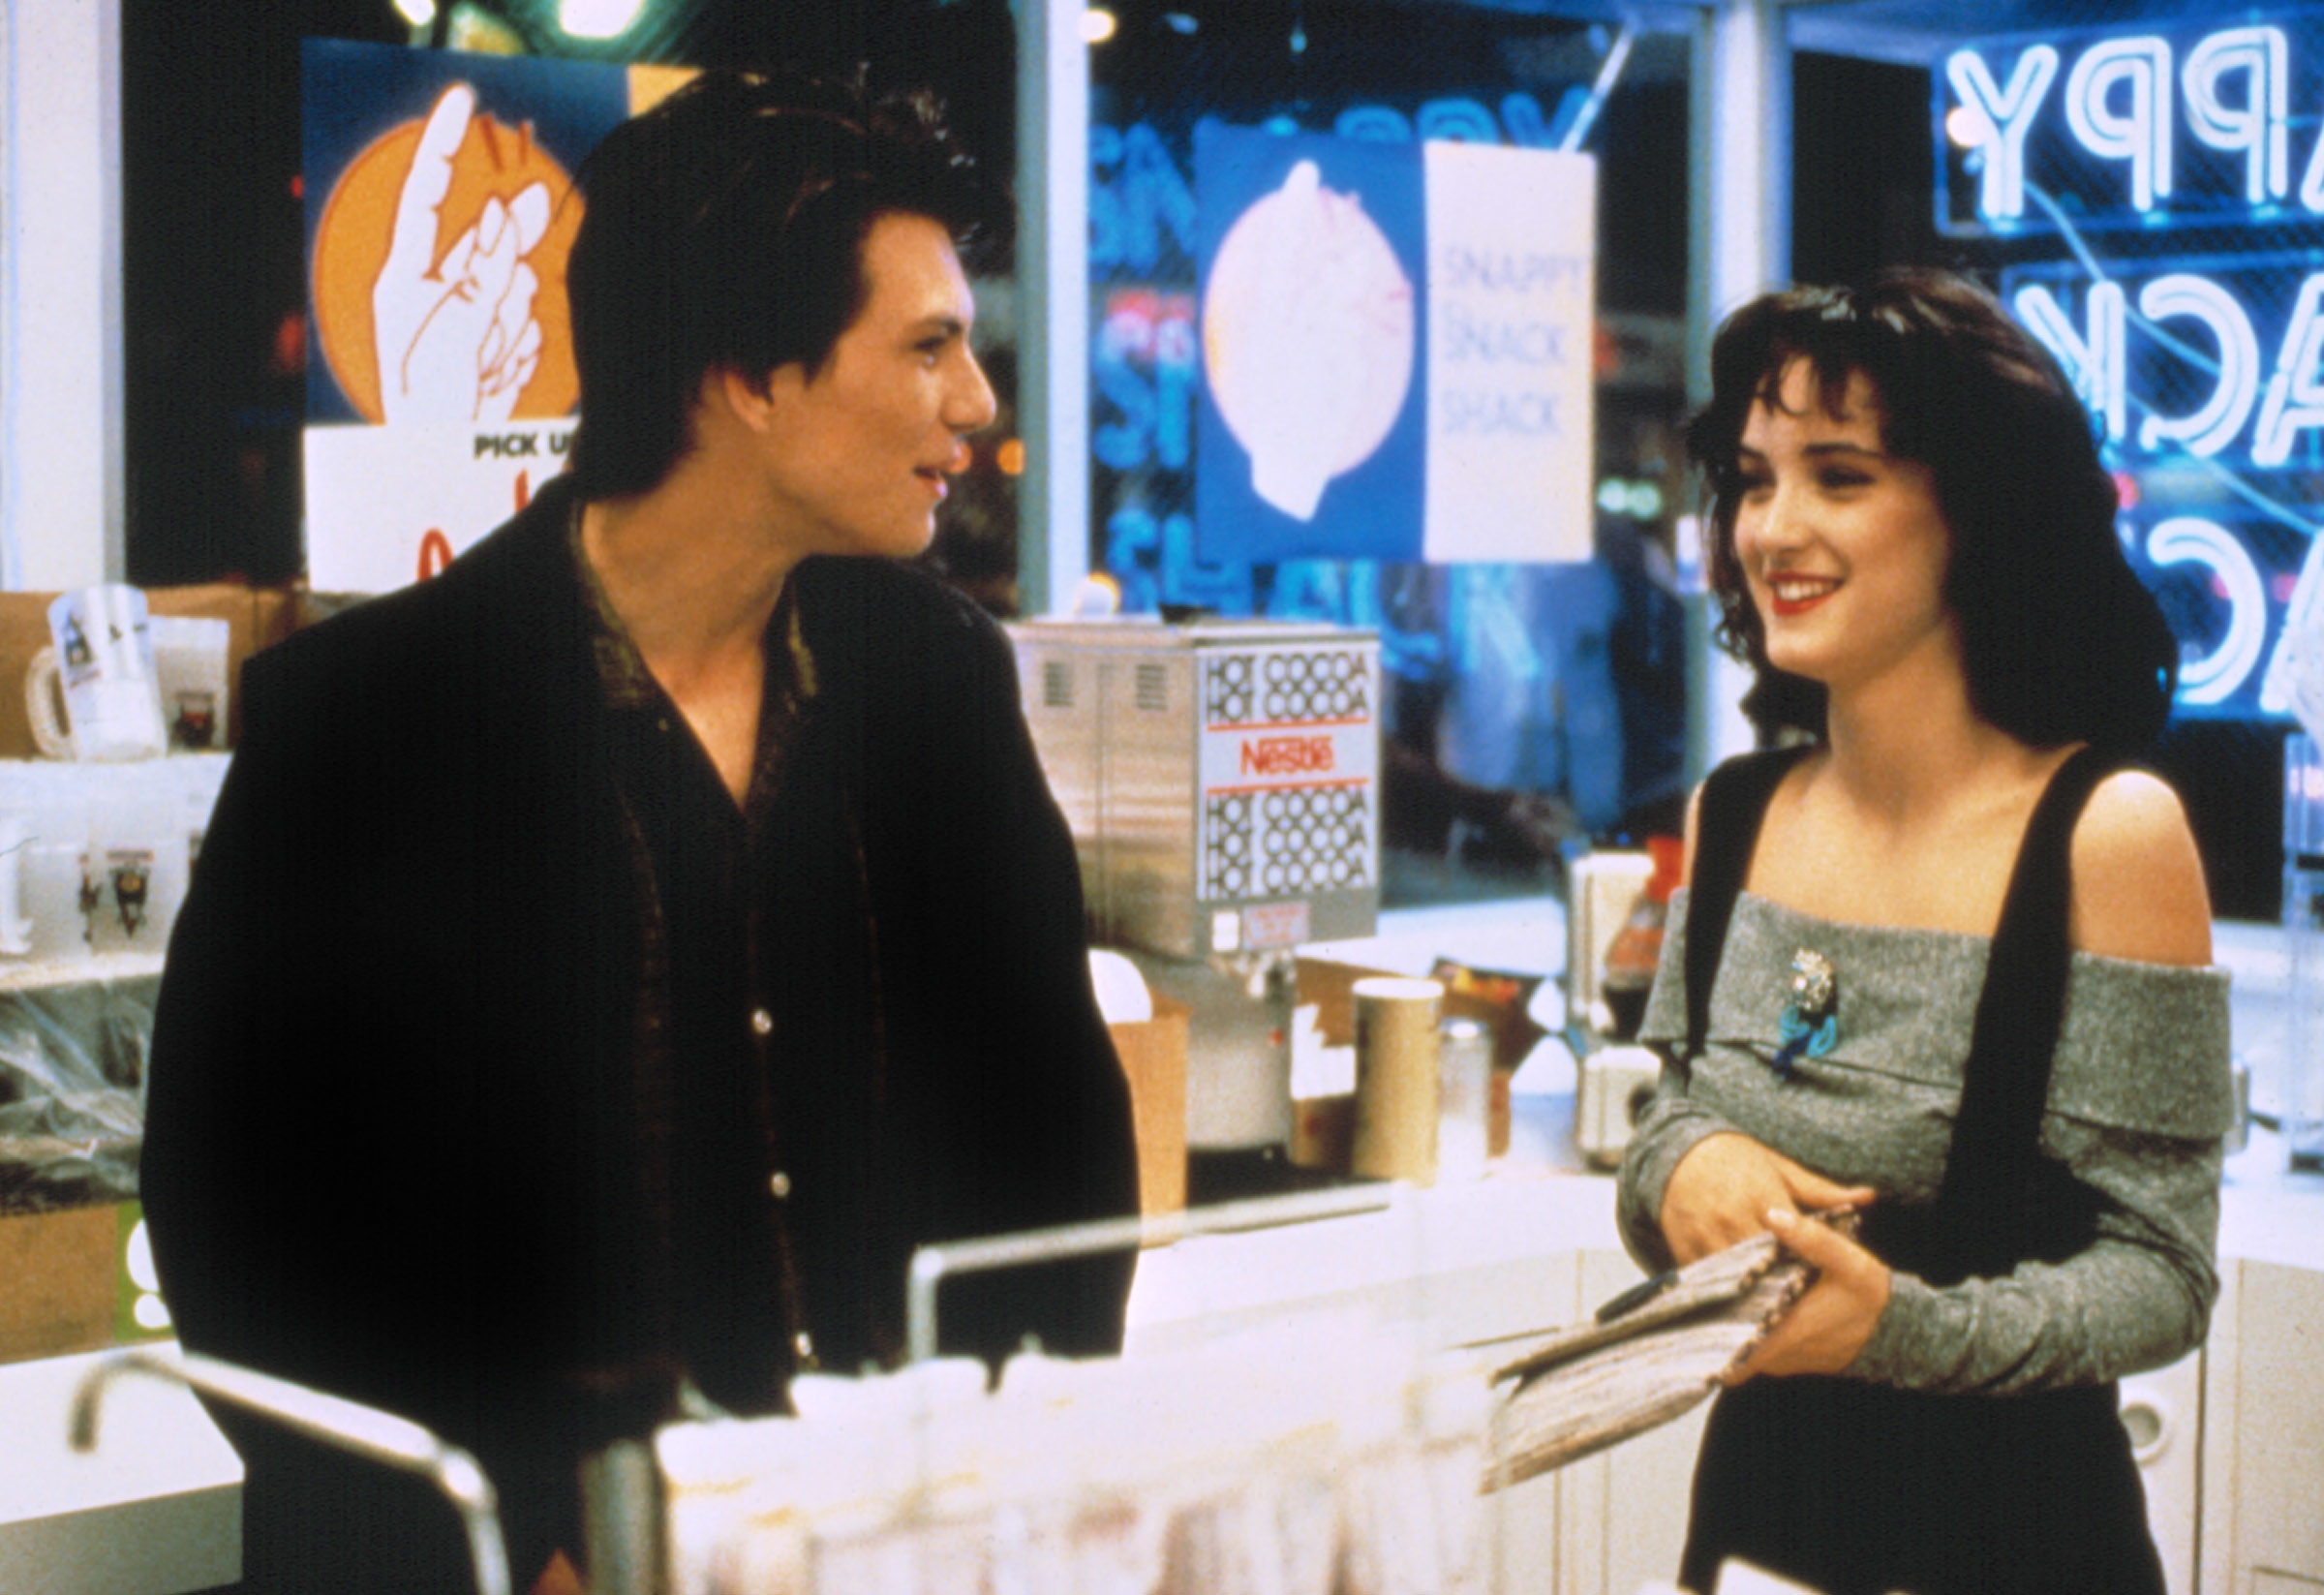 Christian Slater and Winona Ryder laughing inside a store